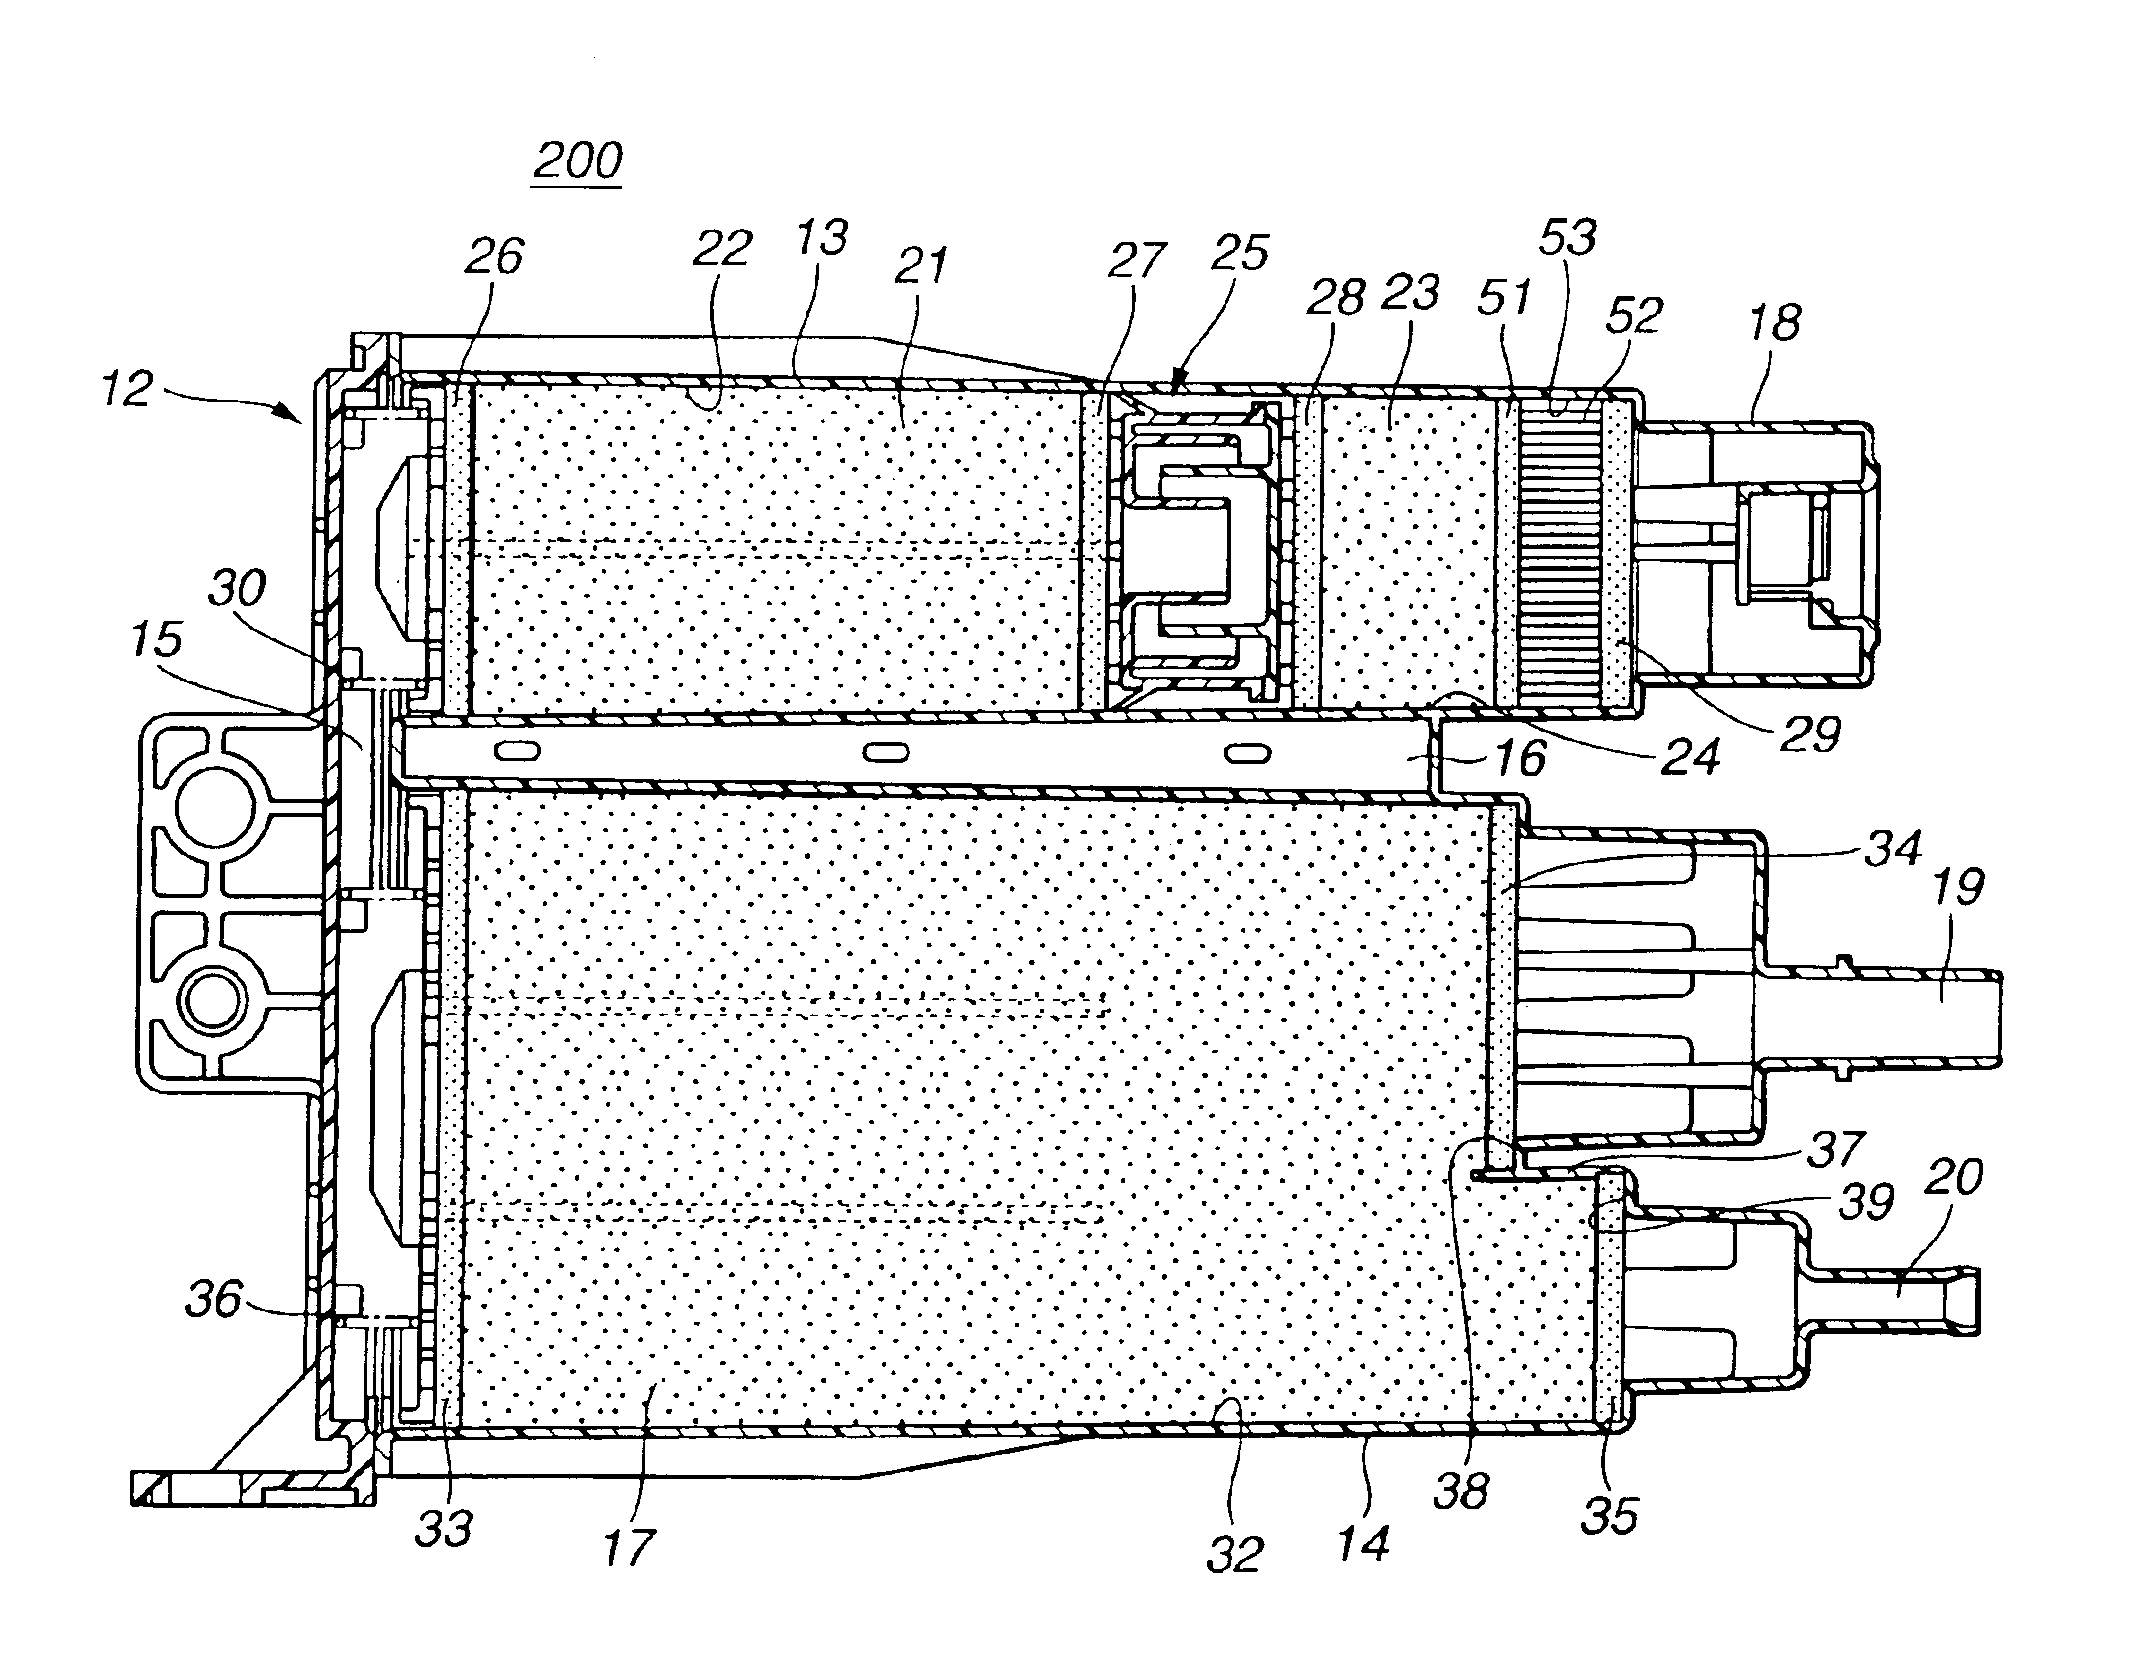 Carbon canister for use in evaporative emission control system of internal combustion engine